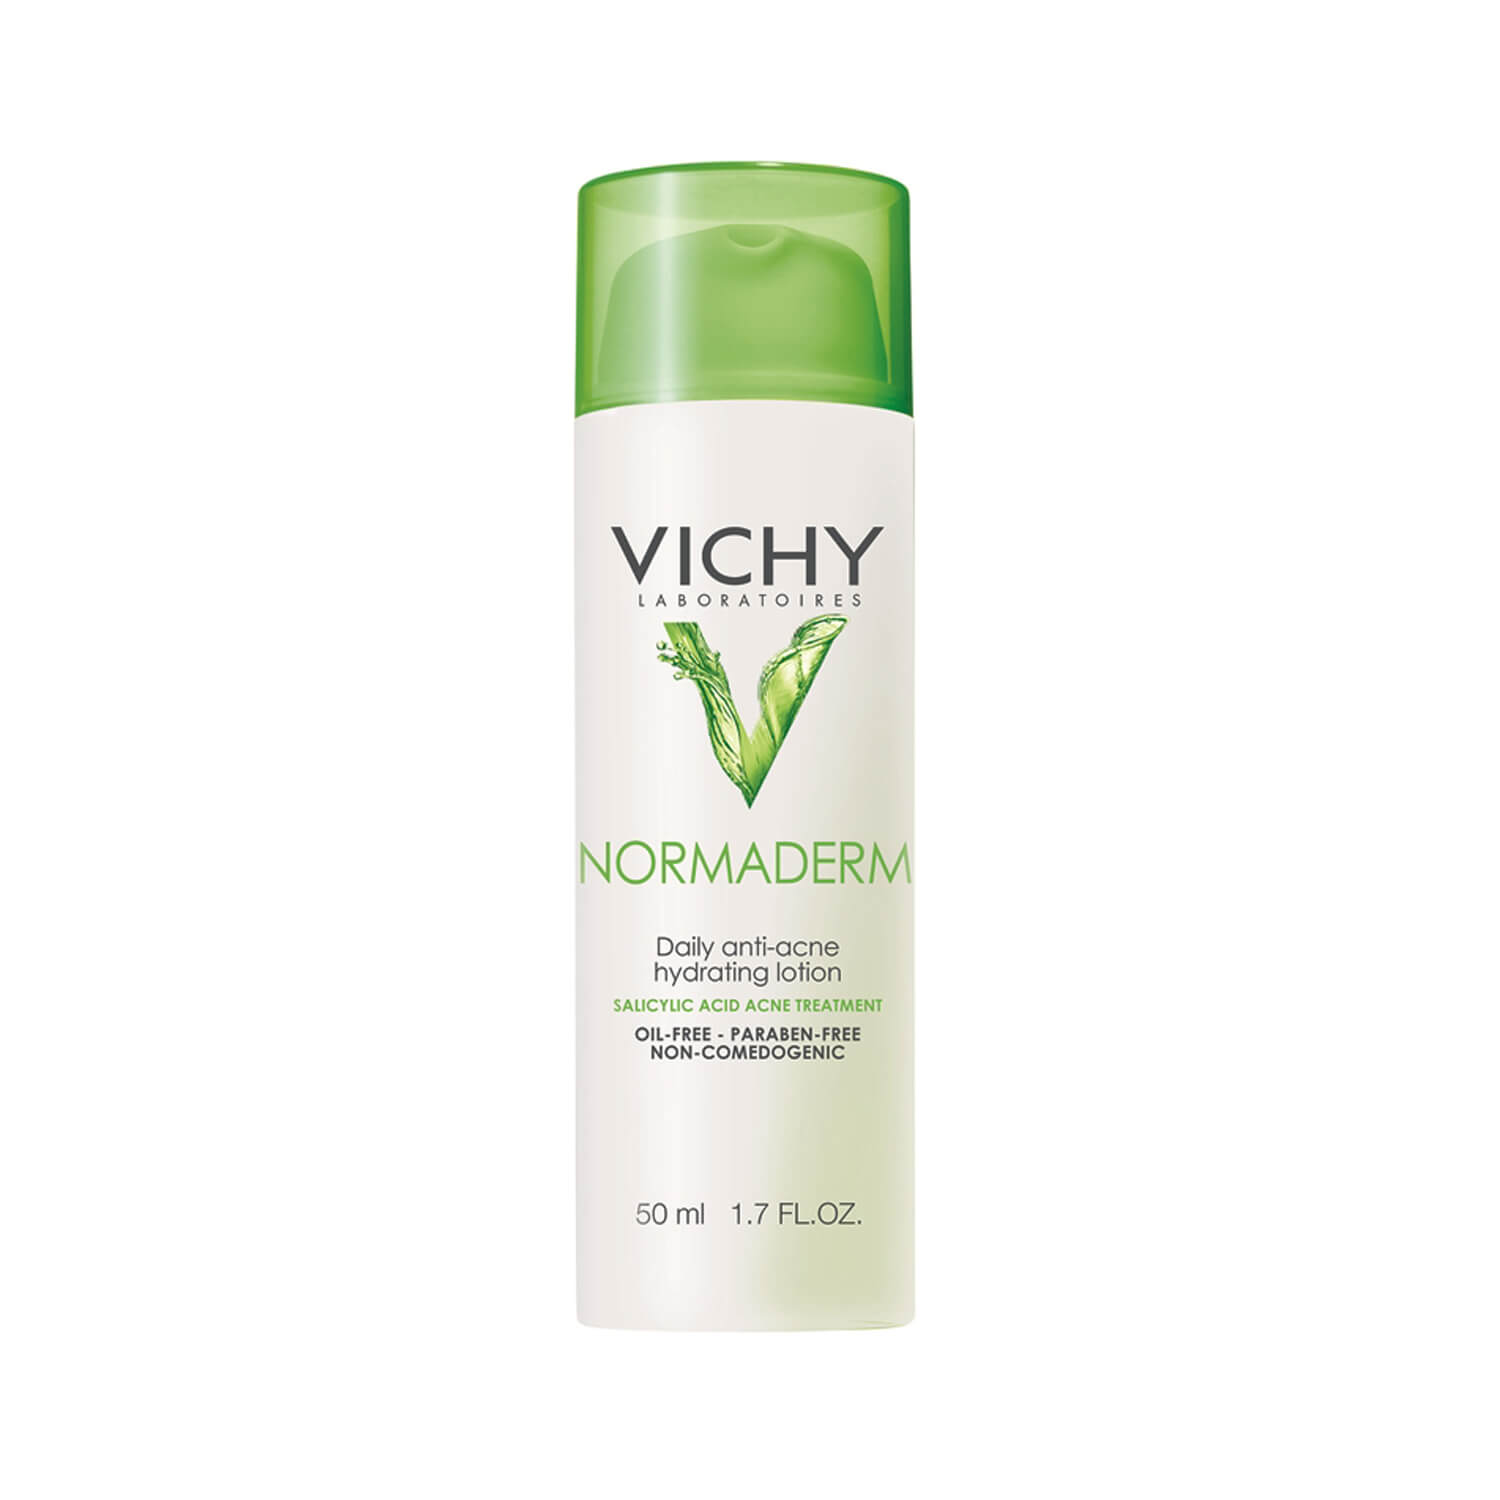 Vichy Normaderm Daily Anti-Acne Hydrating Lotion